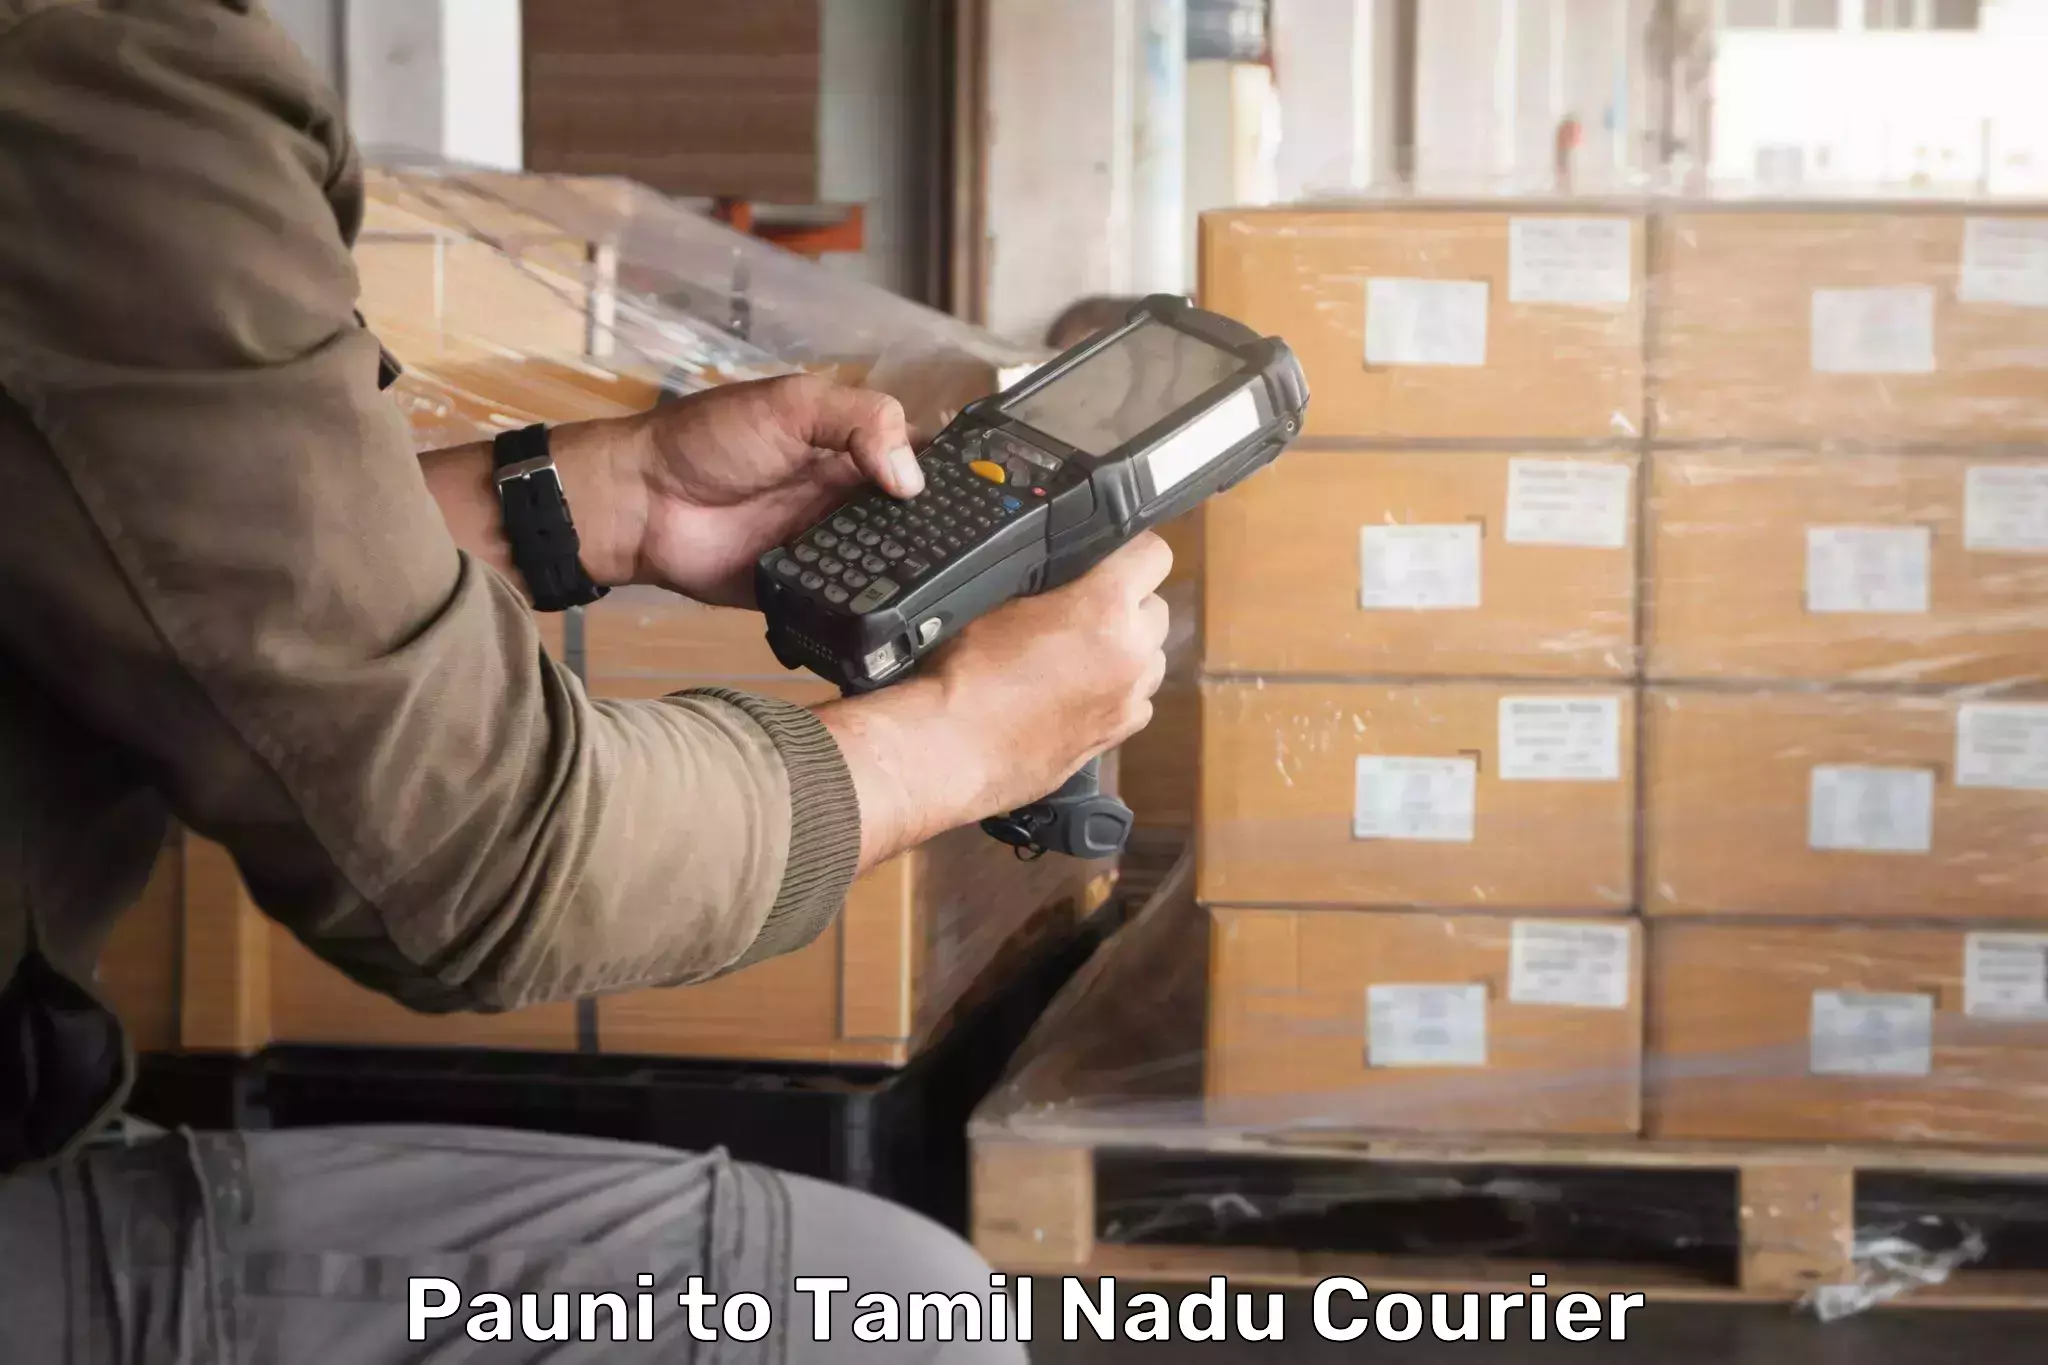 Weekend courier service Pauni to Erode